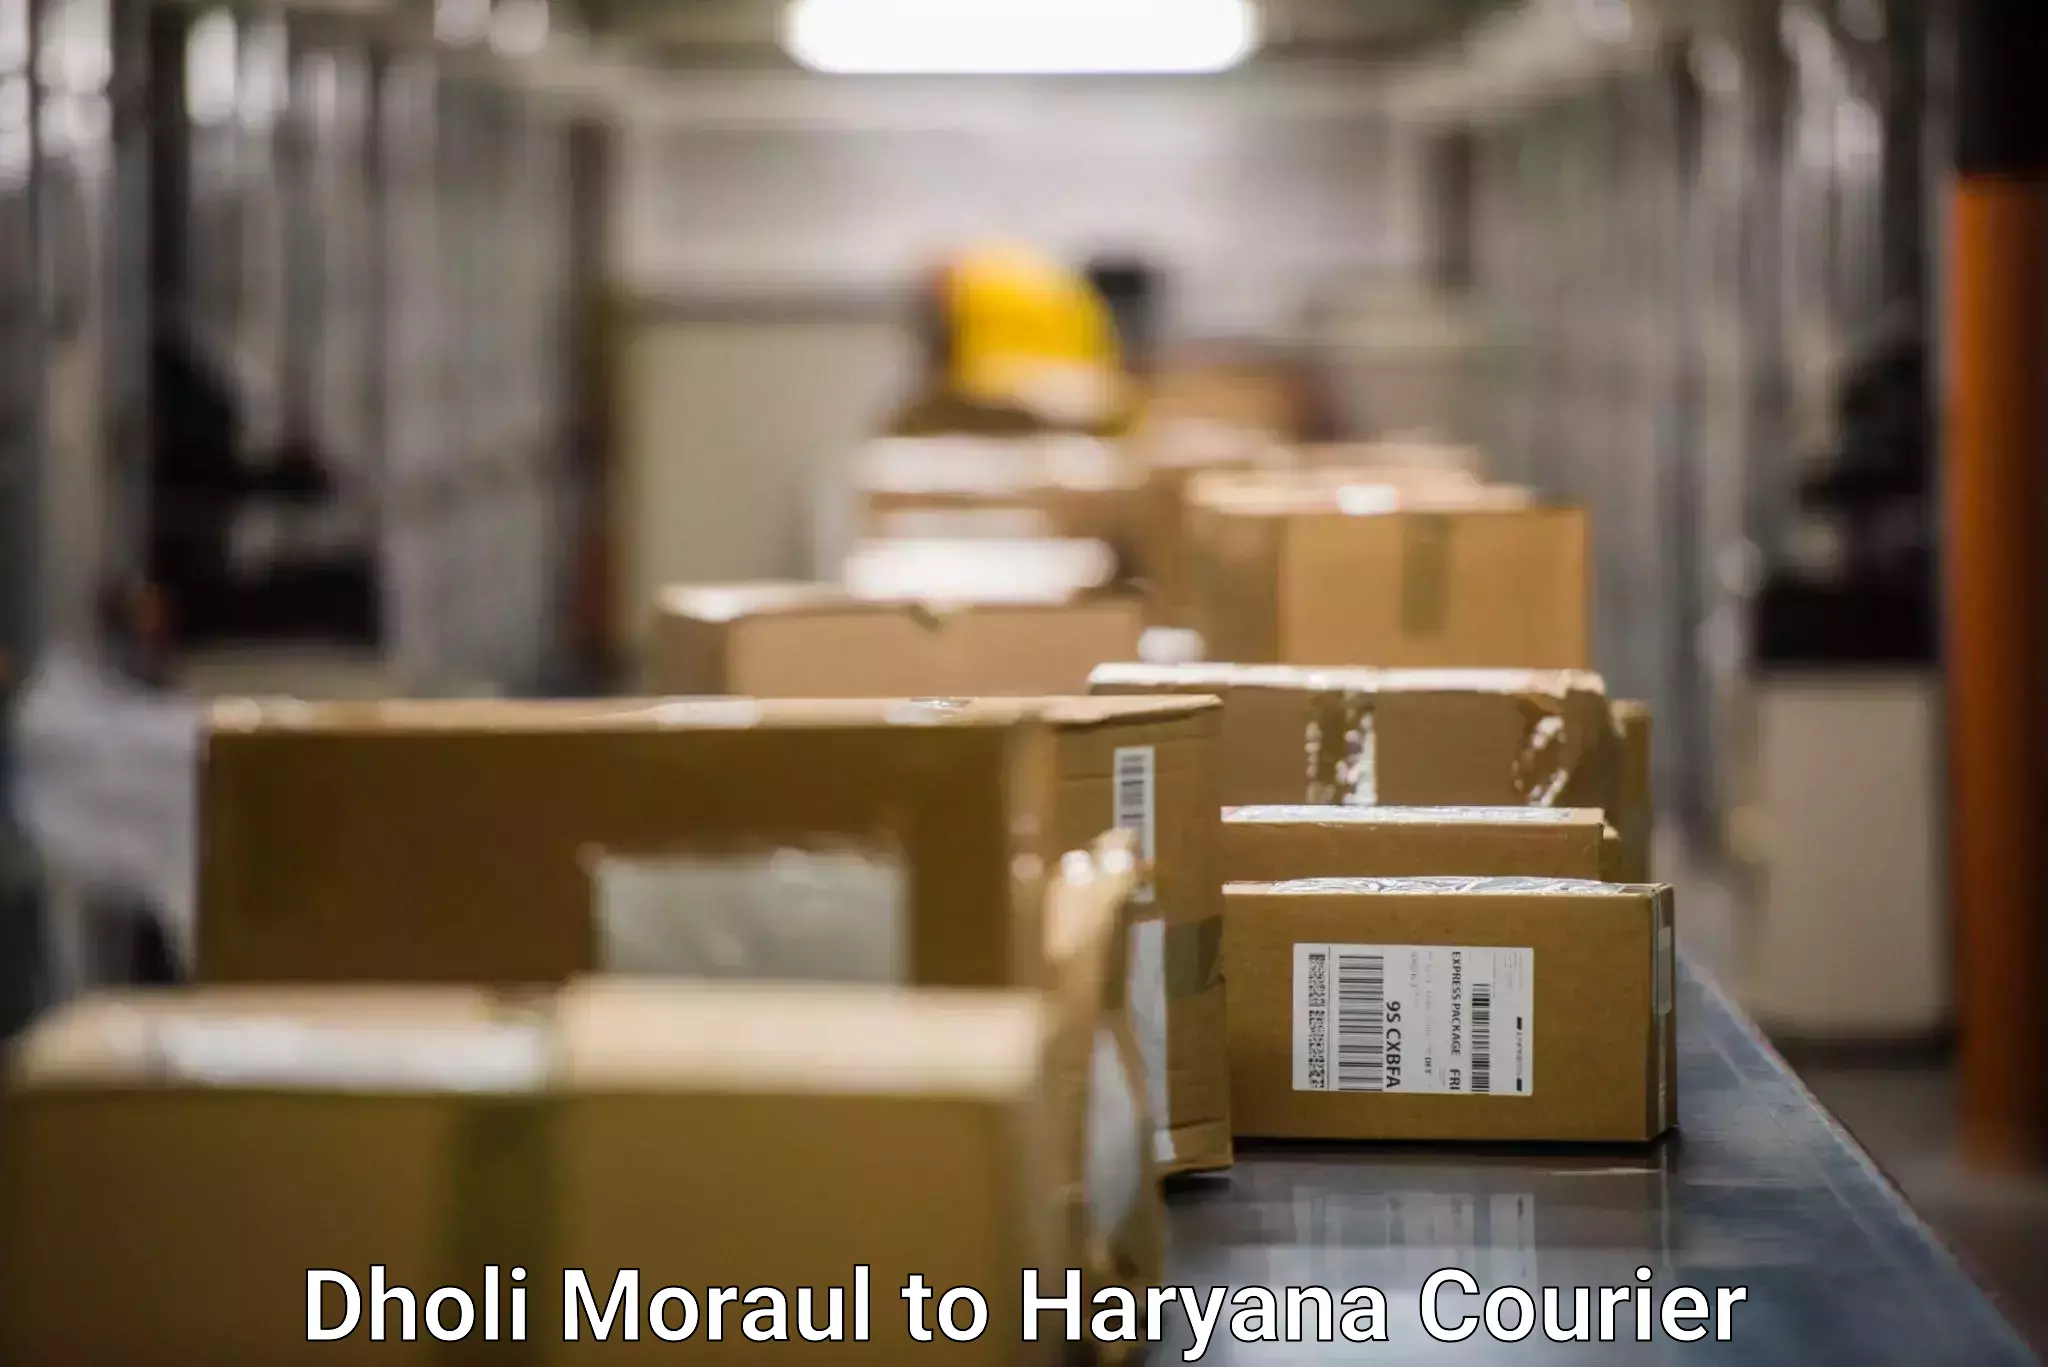 Full-service courier options Dholi Moraul to NCR Haryana